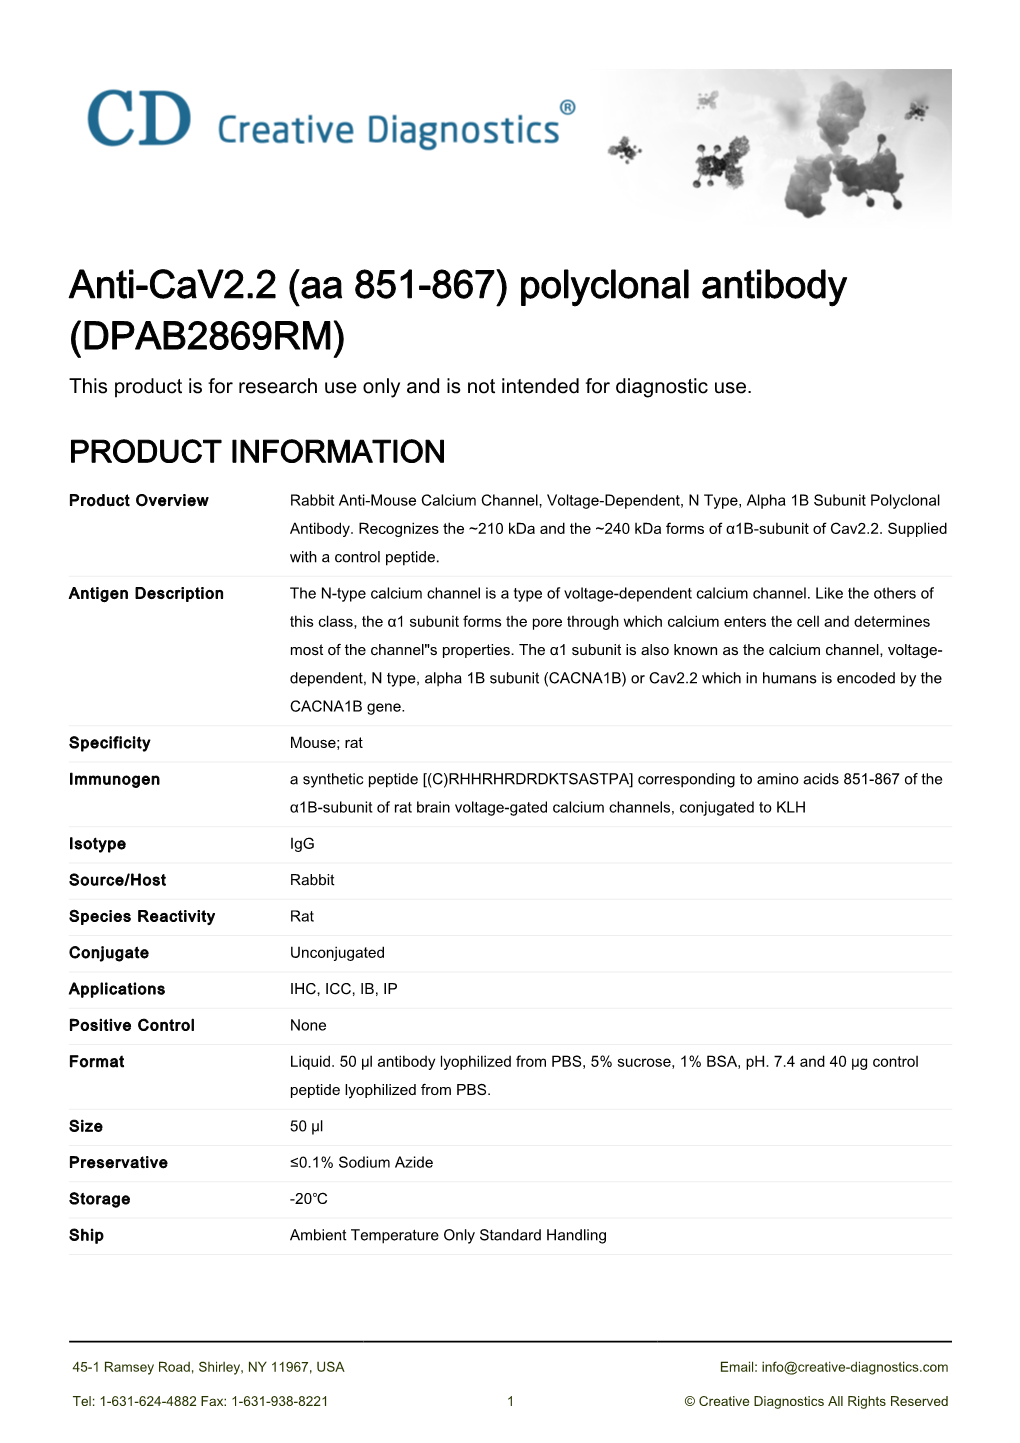 Anti-Cav2.2 (Aa 851-867) Polyclonal Antibody (DPAB2869RM) This Product Is for Research Use Only and Is Not Intended for Diagnostic Use